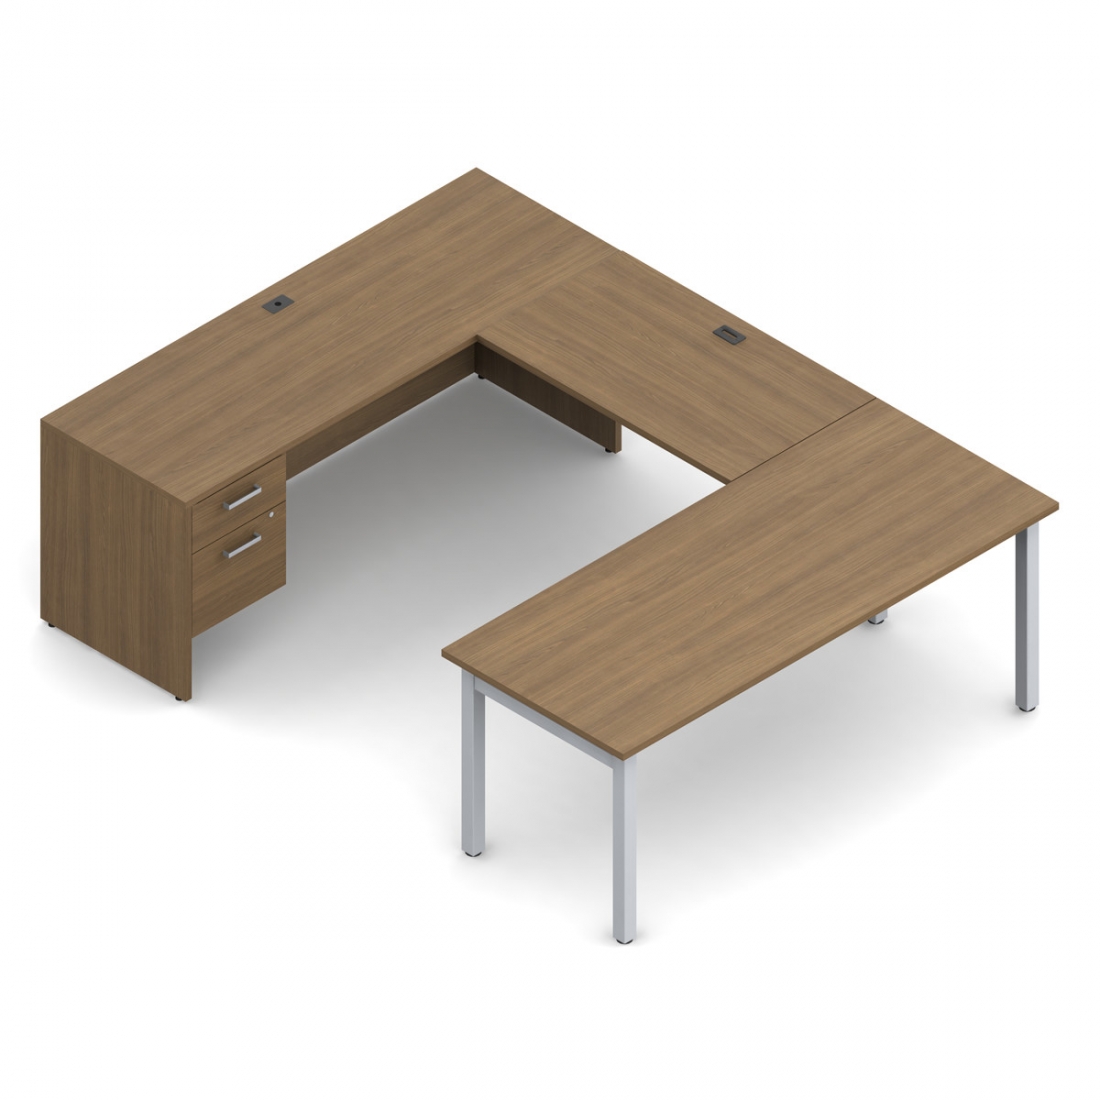 Ionic | "U" Shape Suite with Table Desk - 72"W x 96"D x 29"H overall